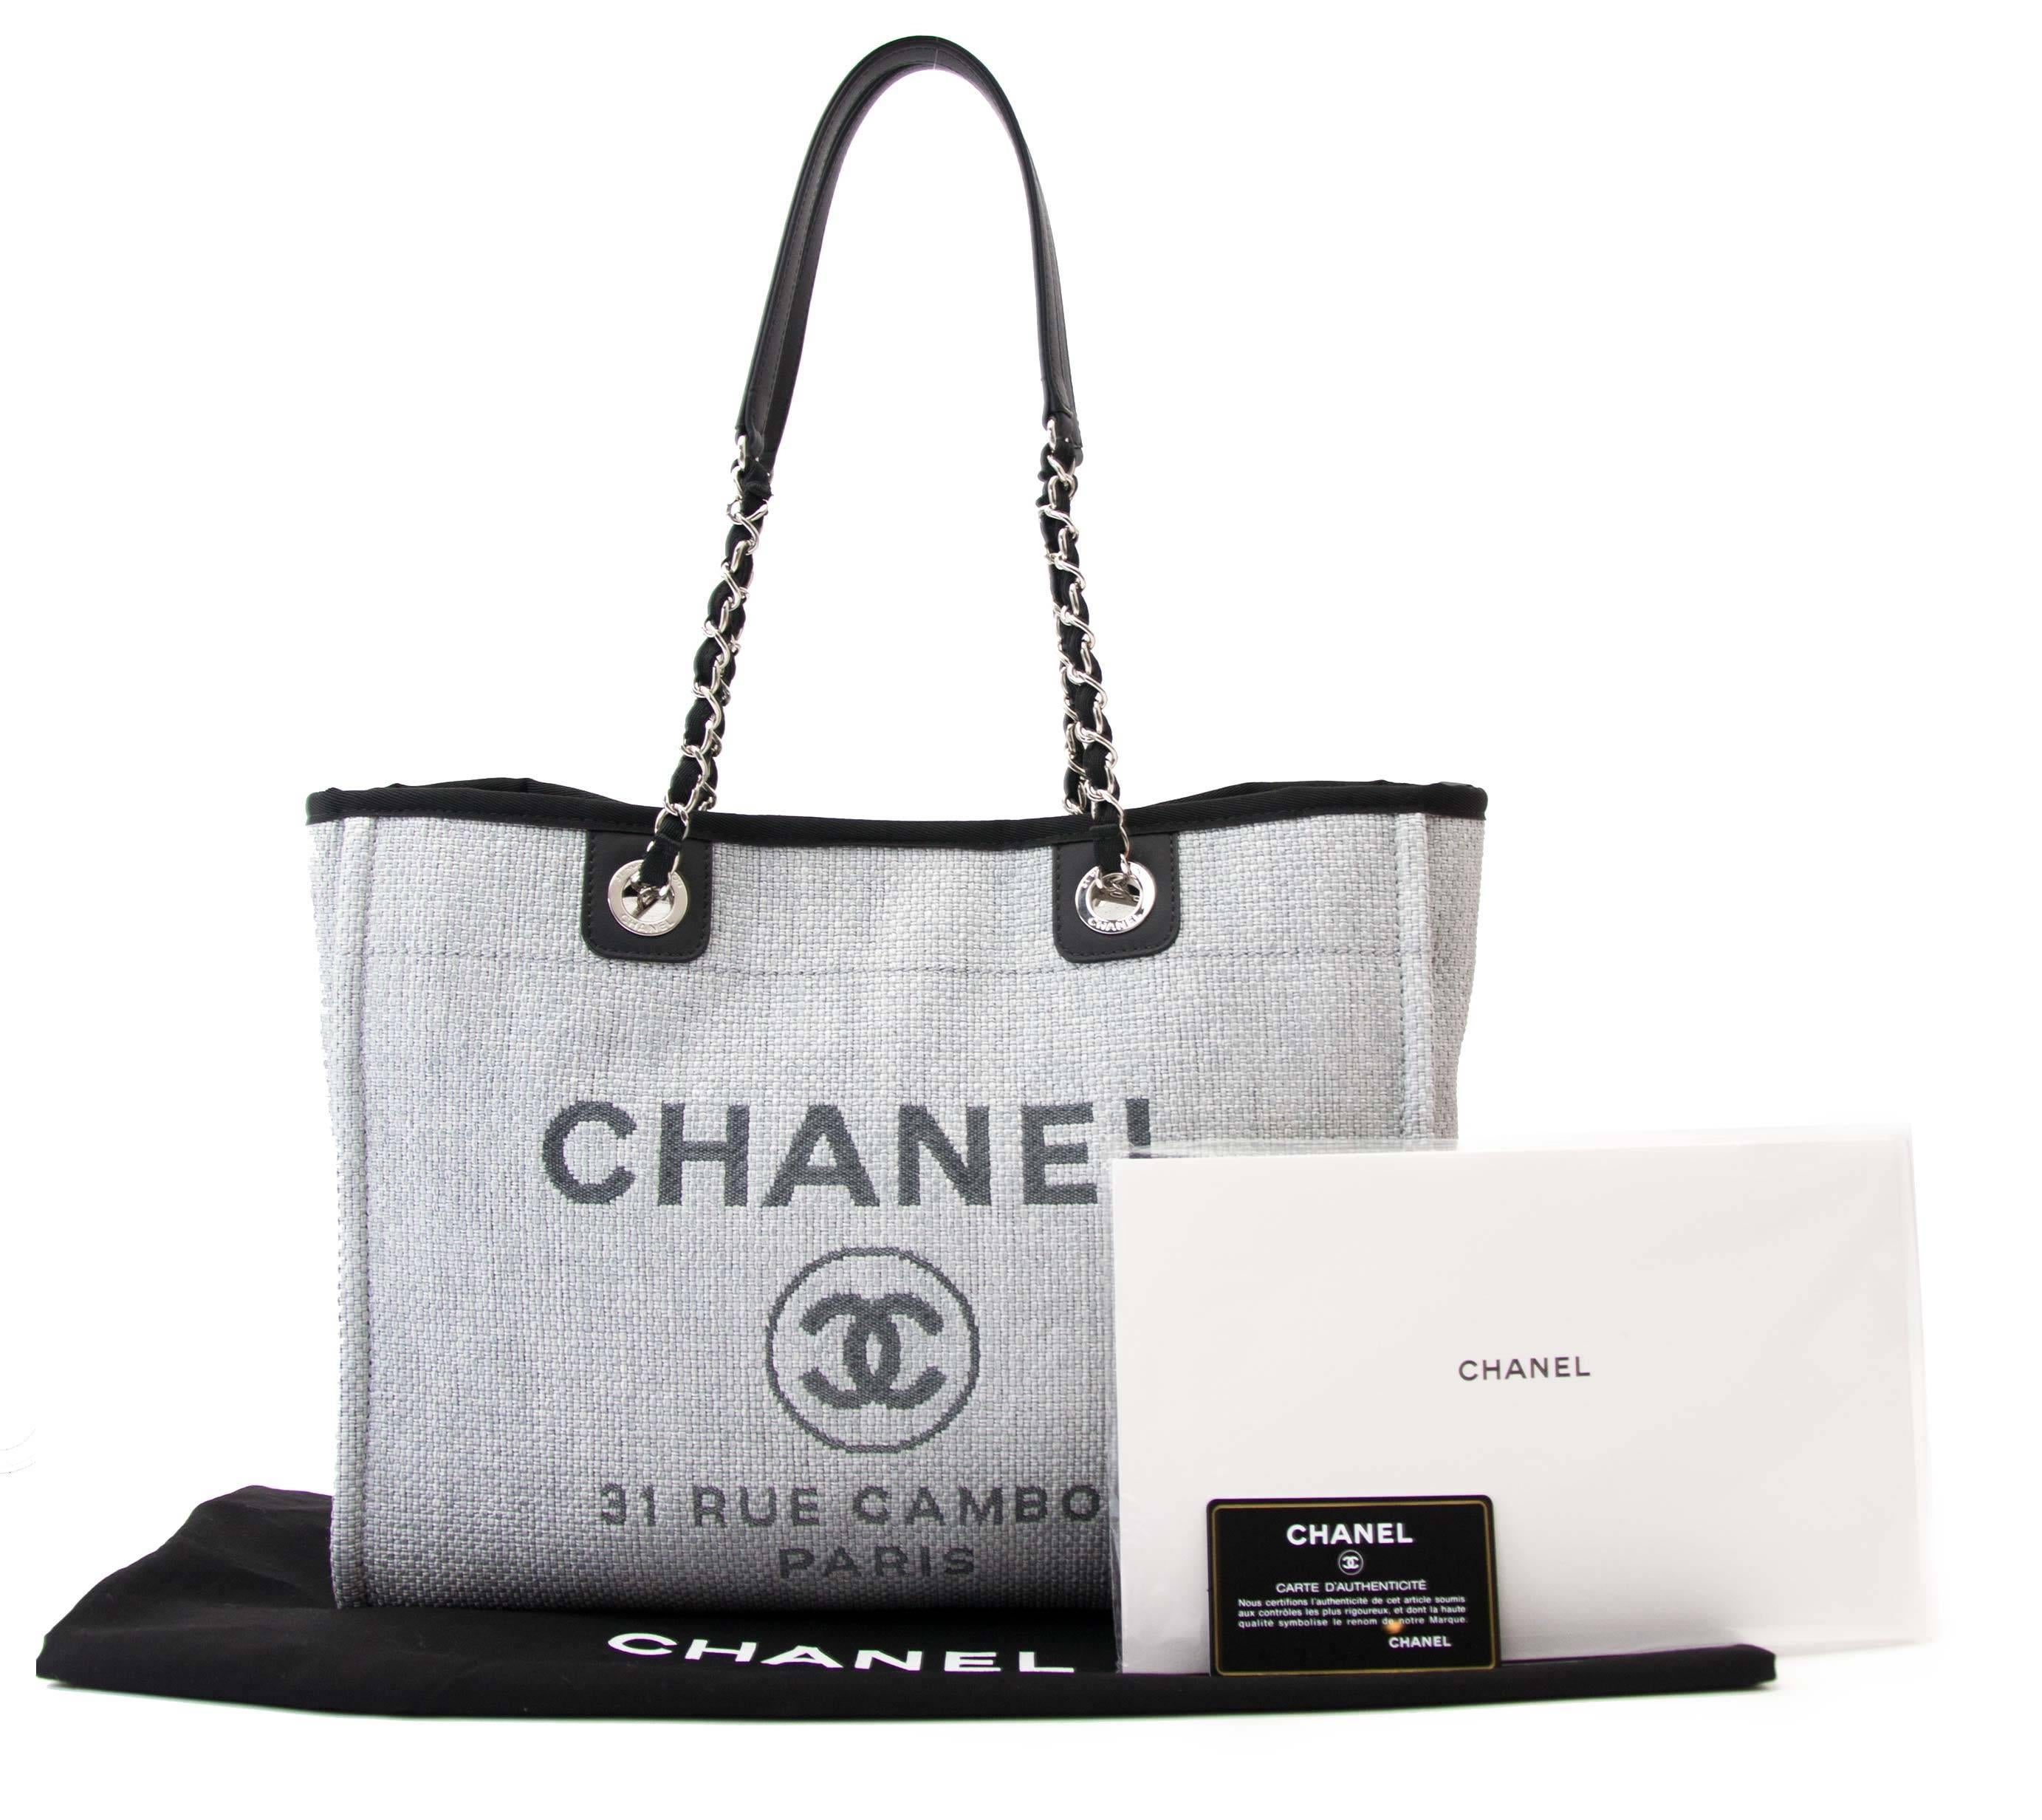 NEVER USED


This very exclusive and sold out everywhere tote bag by Chanel is a true catch! Its canvas upper and leather trims give this bag an effortlessly chique upgrade. Wear it for a day at the beach or to a casual event, you'll turn heads no